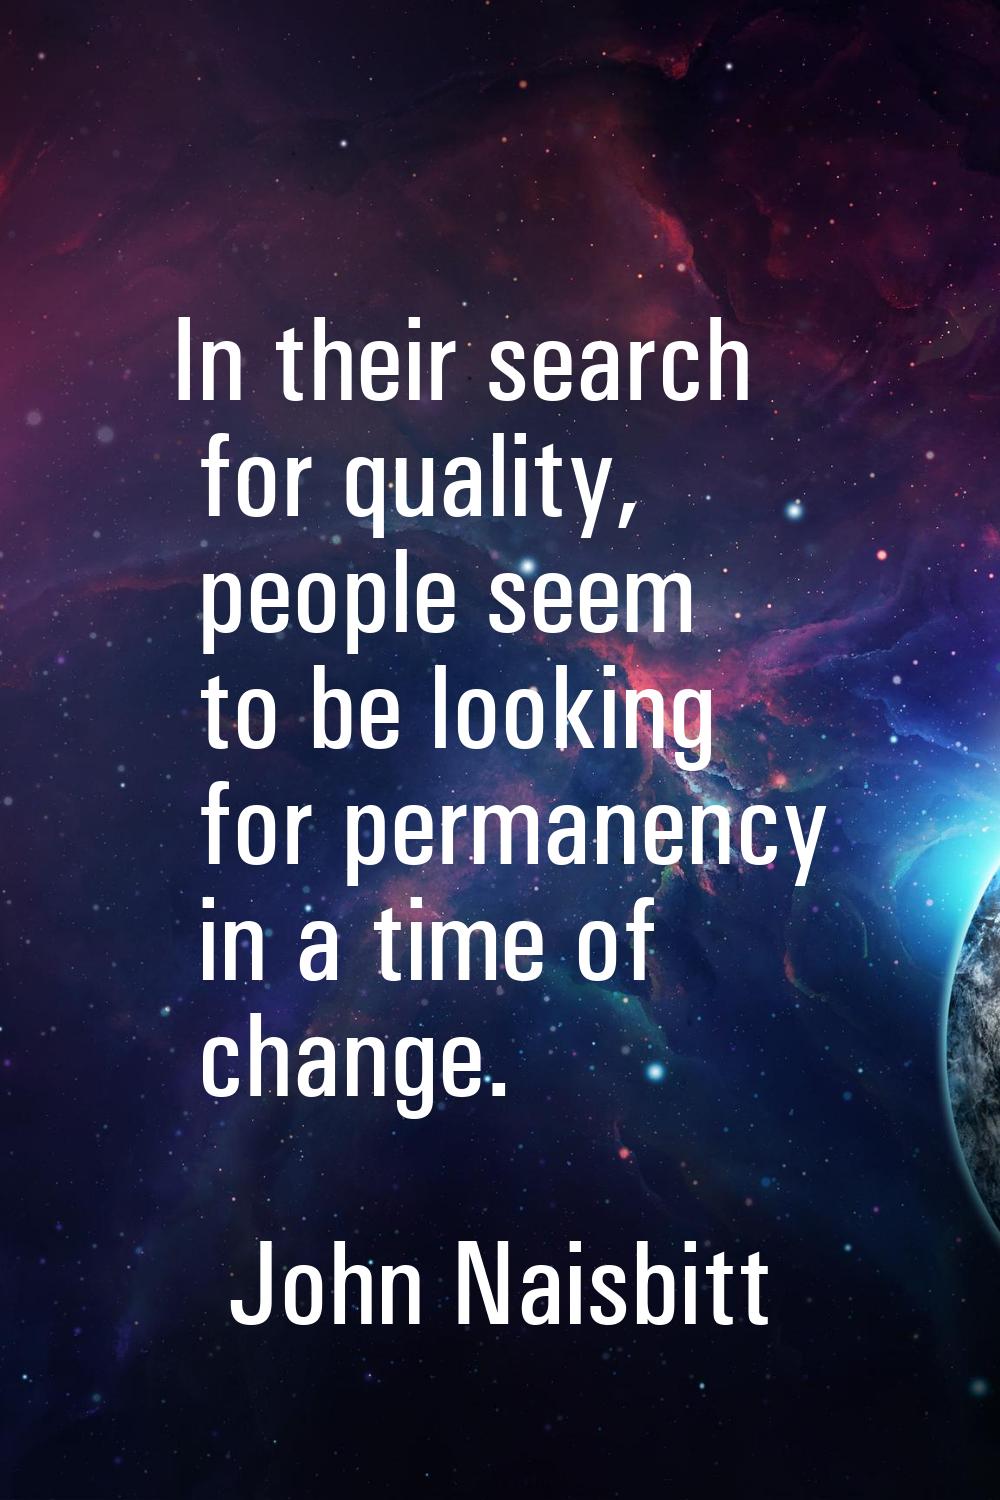 In their search for quality, people seem to be looking for permanency in a time of change.